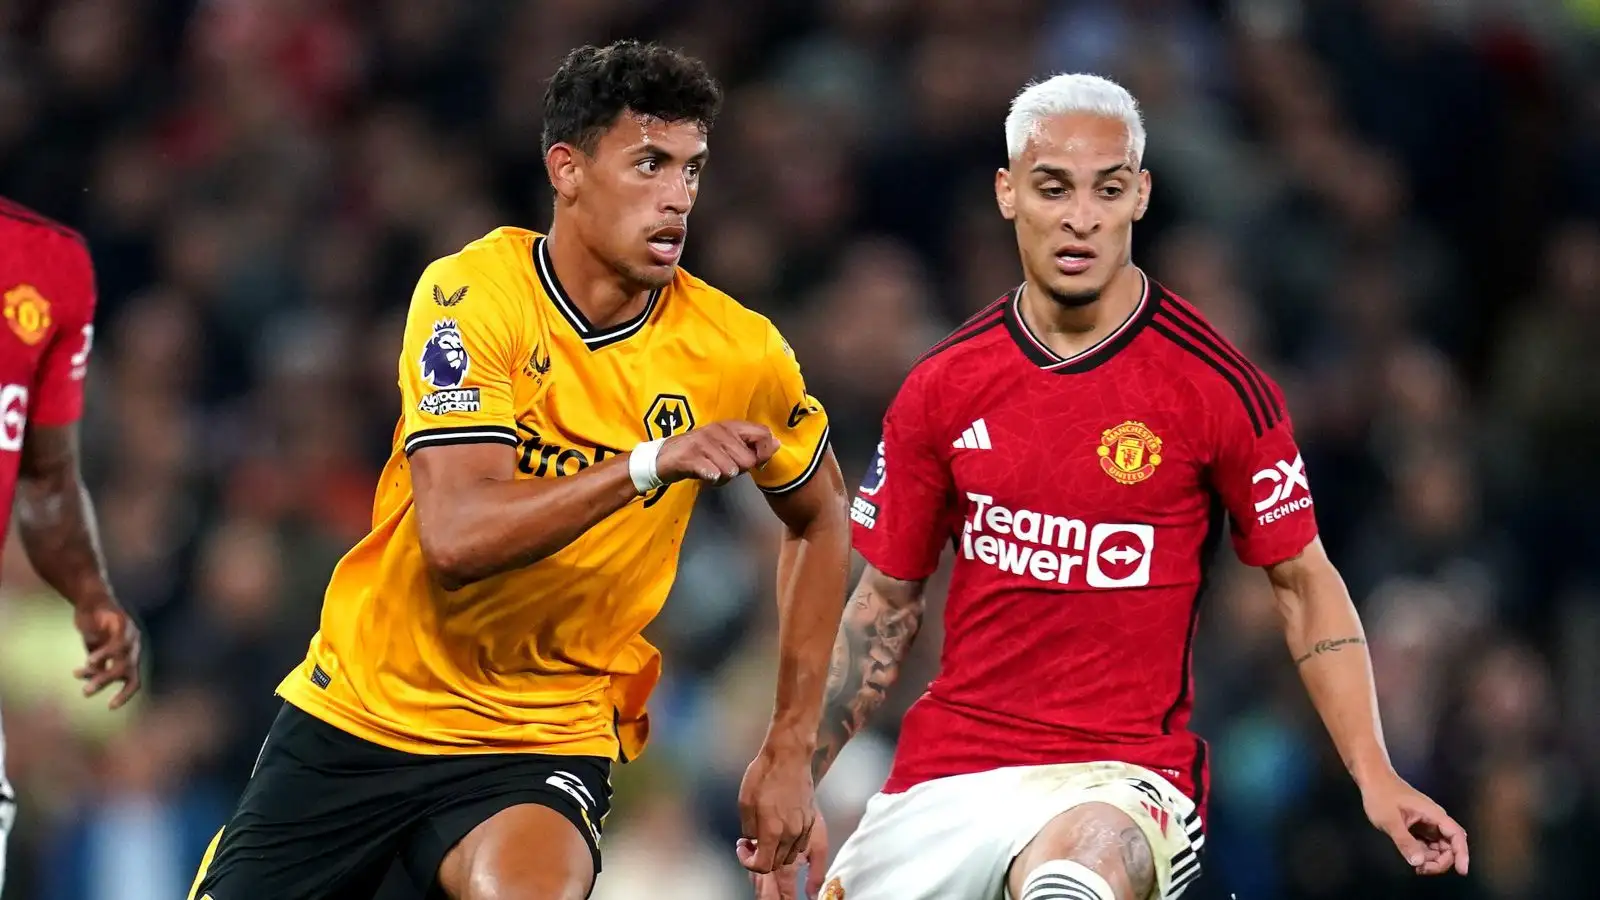 Wolves midfielder Matheus Nunes during a game against Manchester United.